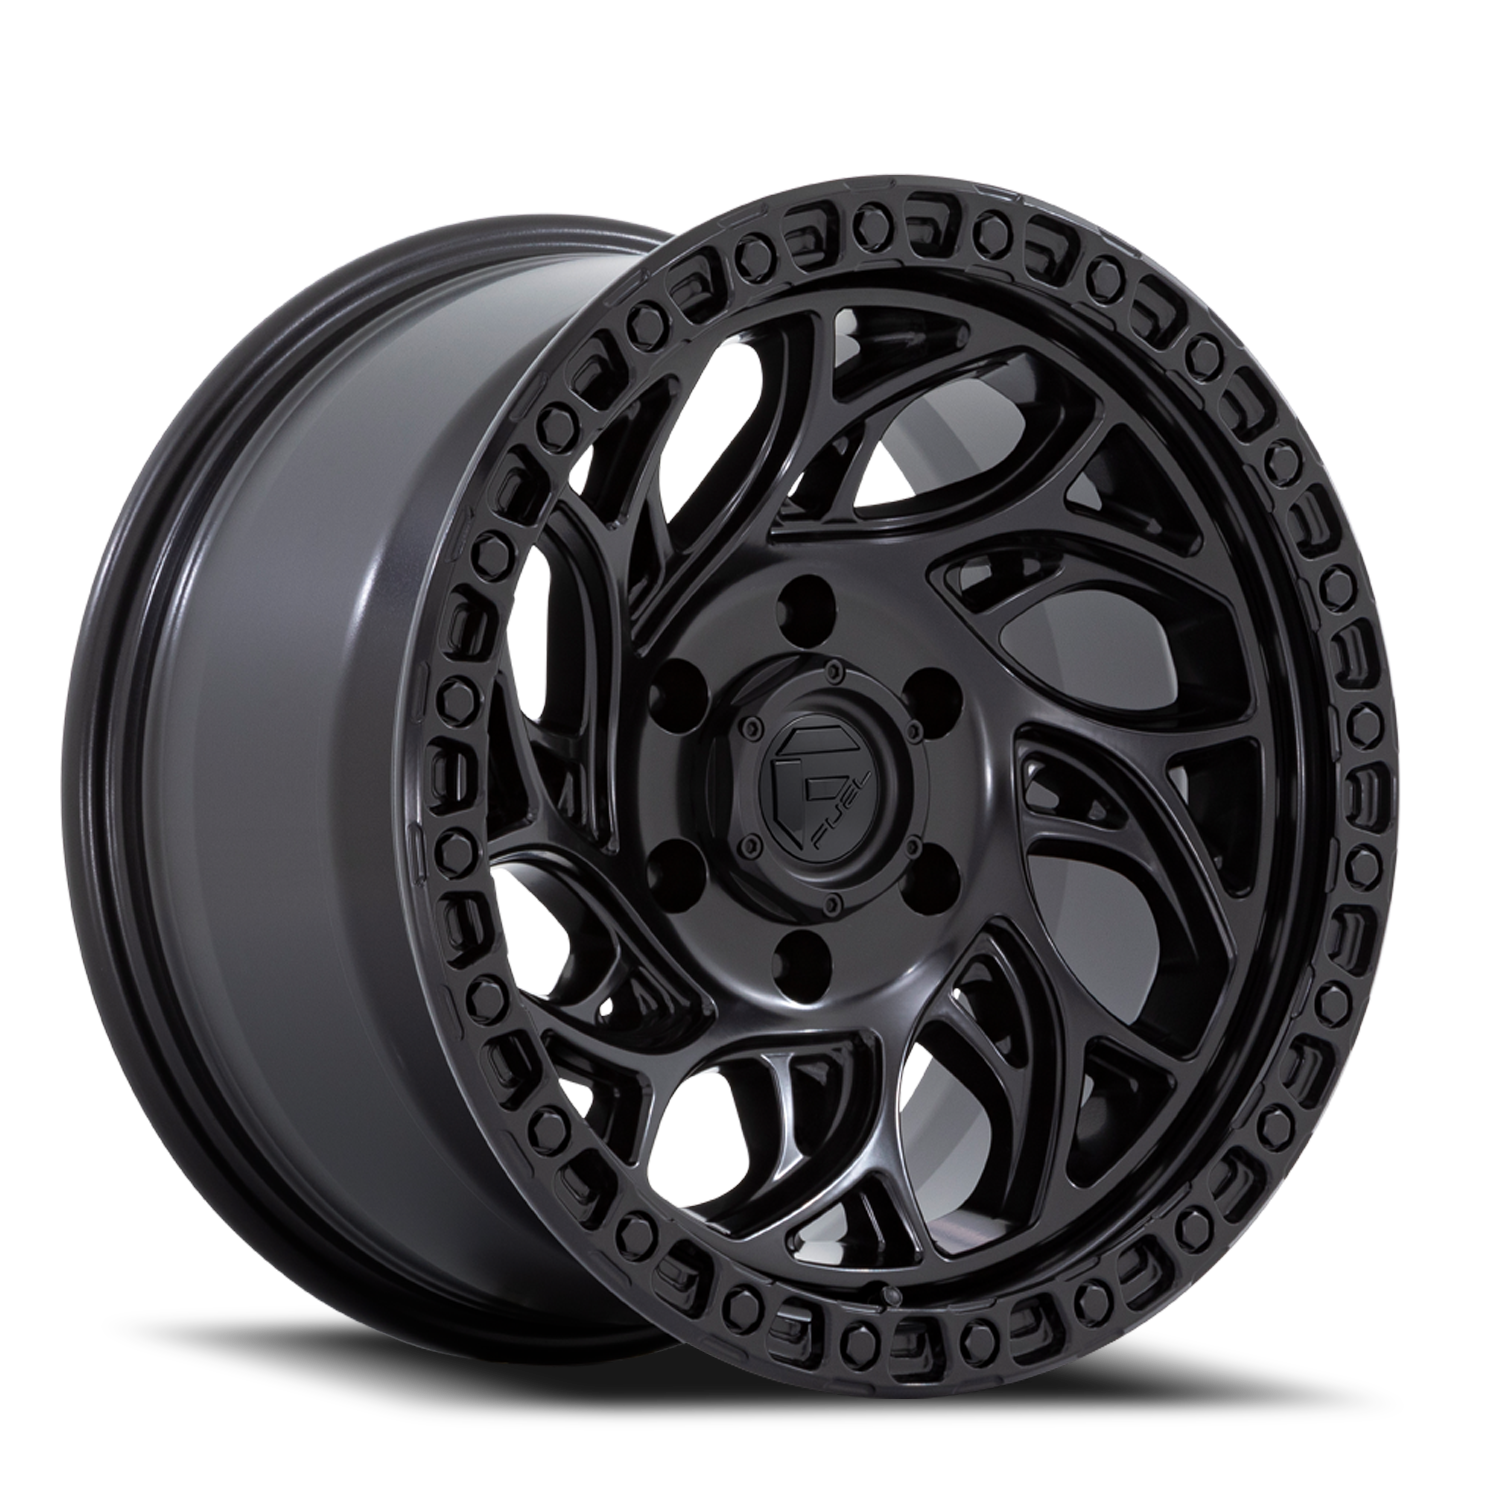 Aluminum Wheels 18X9 Runner OR D852 5 On 139.7 Blackout 78.1 Bore -12 Offset Fuel Off Road Wheels